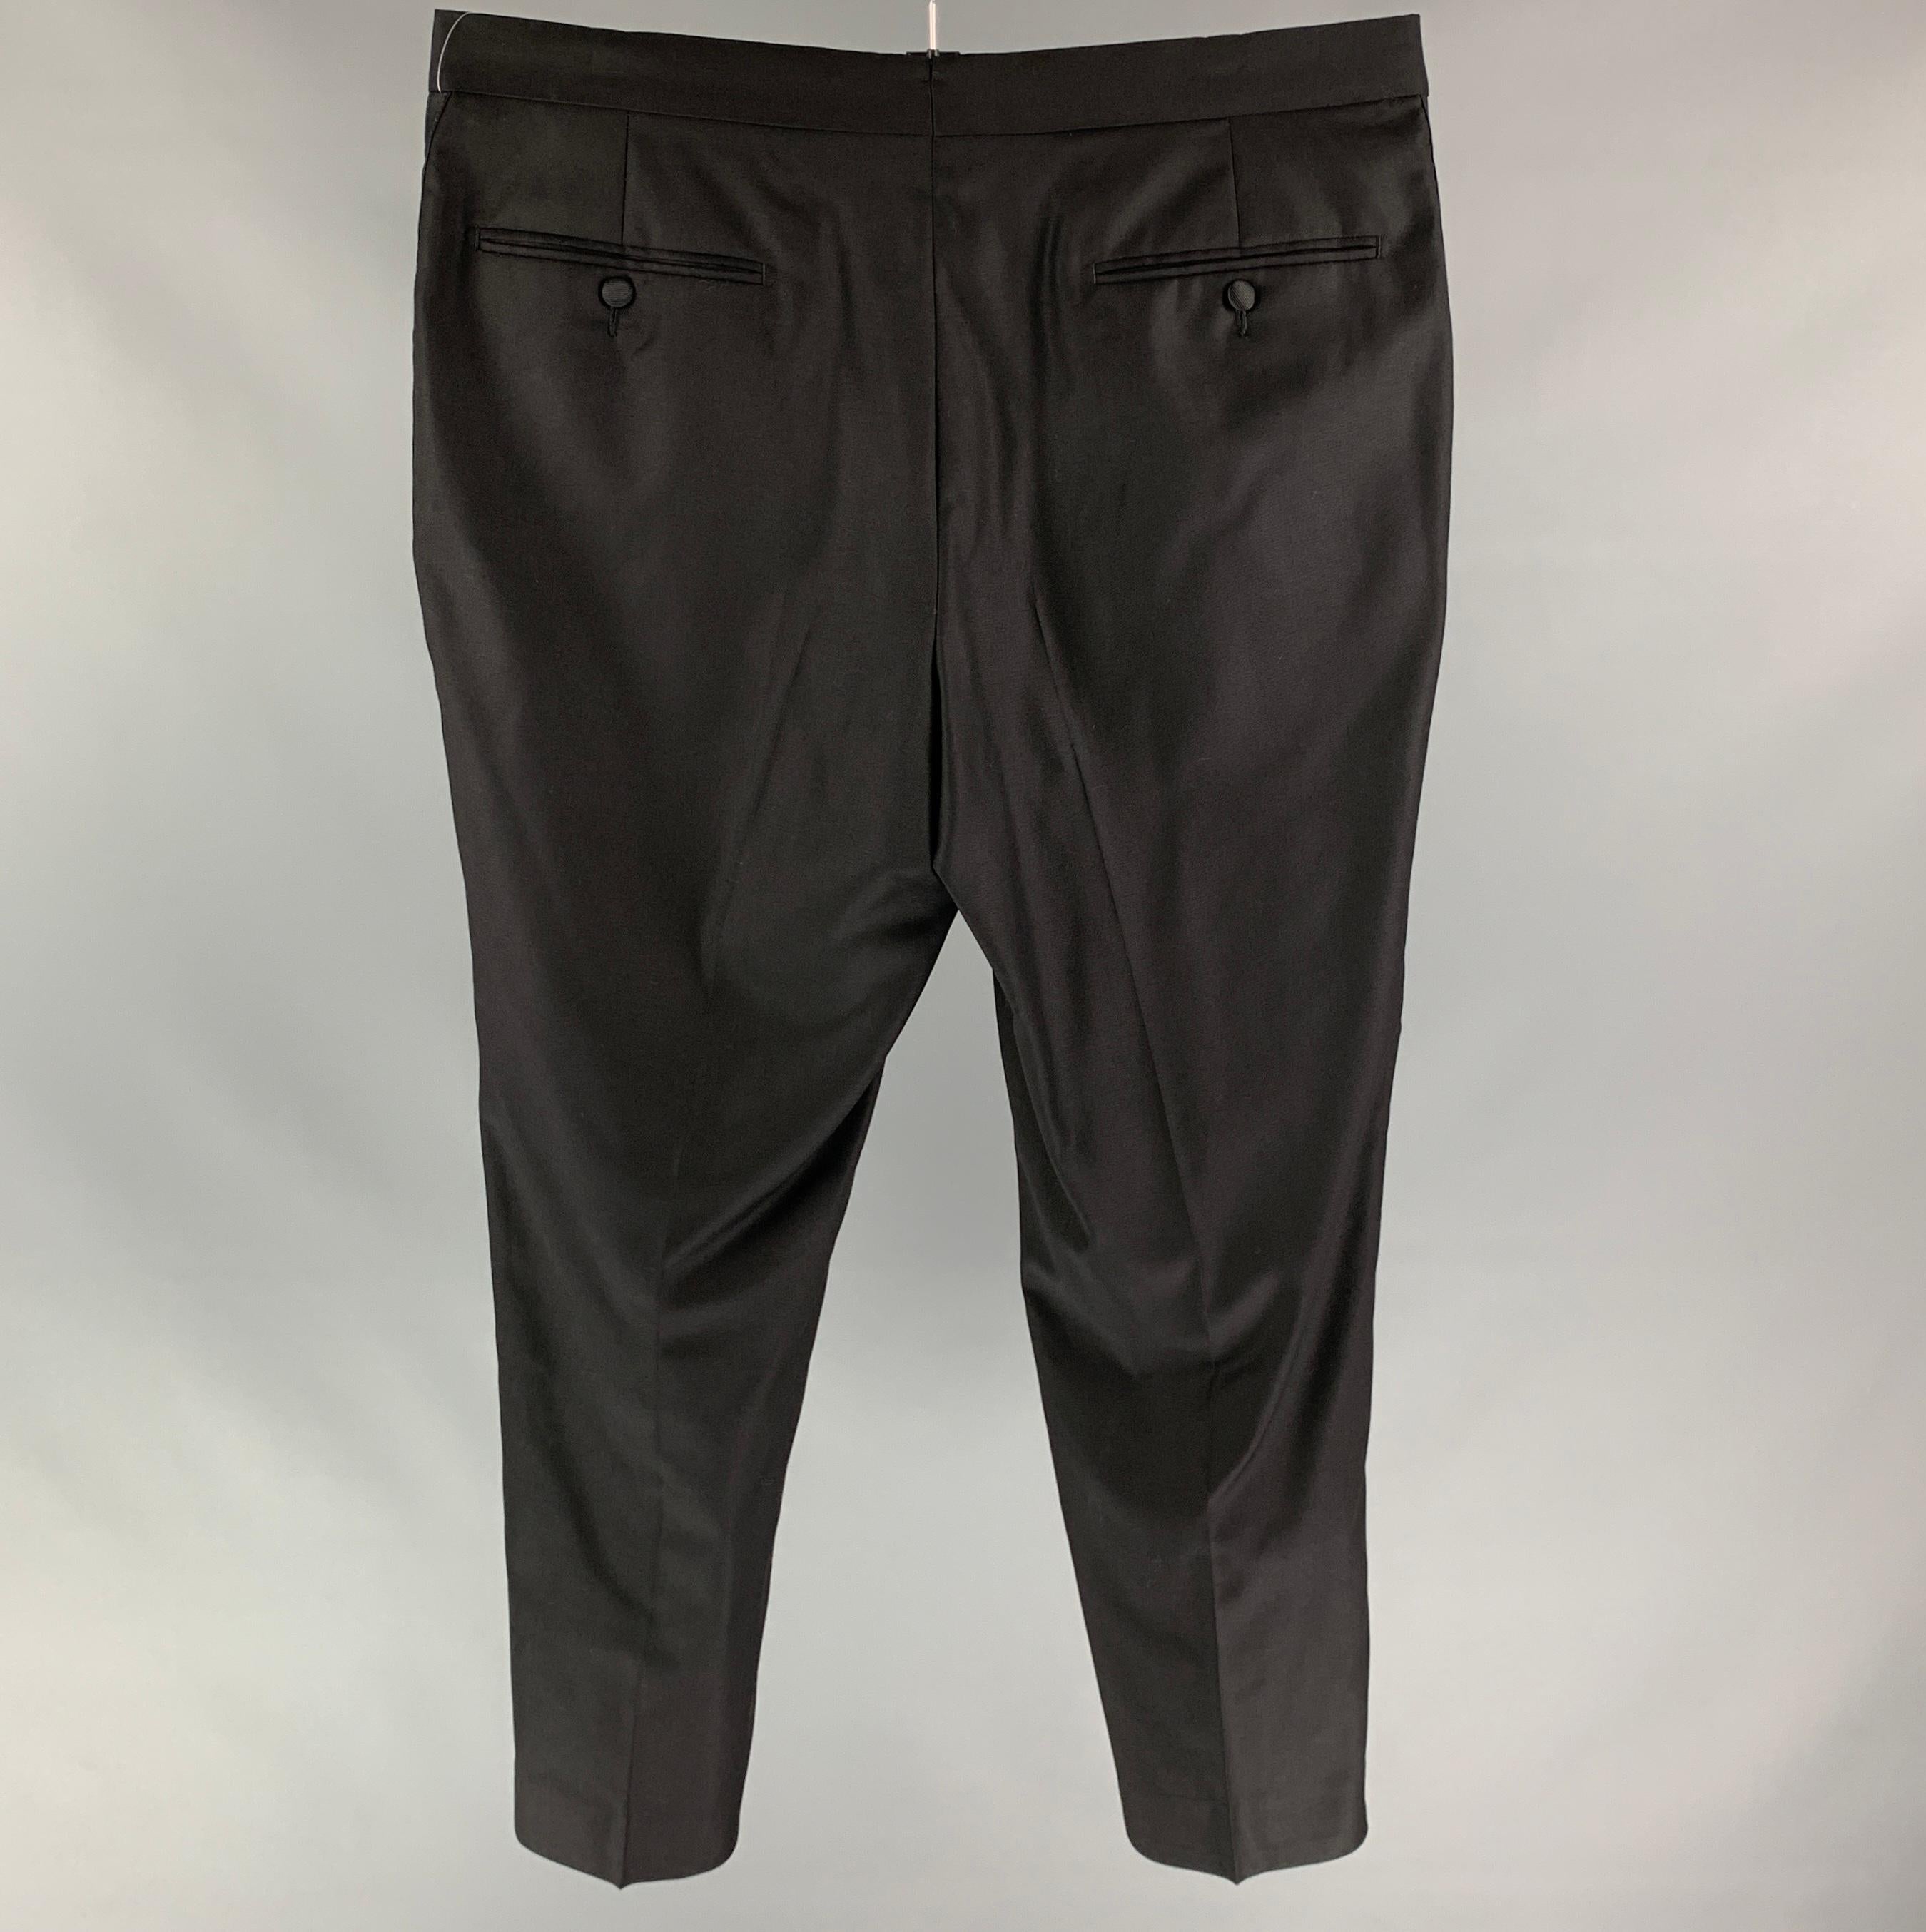 SUIT SUPPLY tuxedo dress pants comes in a black wool featuring a flat front, straight leg, front tab, and a zip fly closure.

Very Good Pre-Owned Condition.
Marked: 52

Measurements:

Waist: 36 in.
Rise: 10.5 in.
Inseam: 30 in.  
SKU: